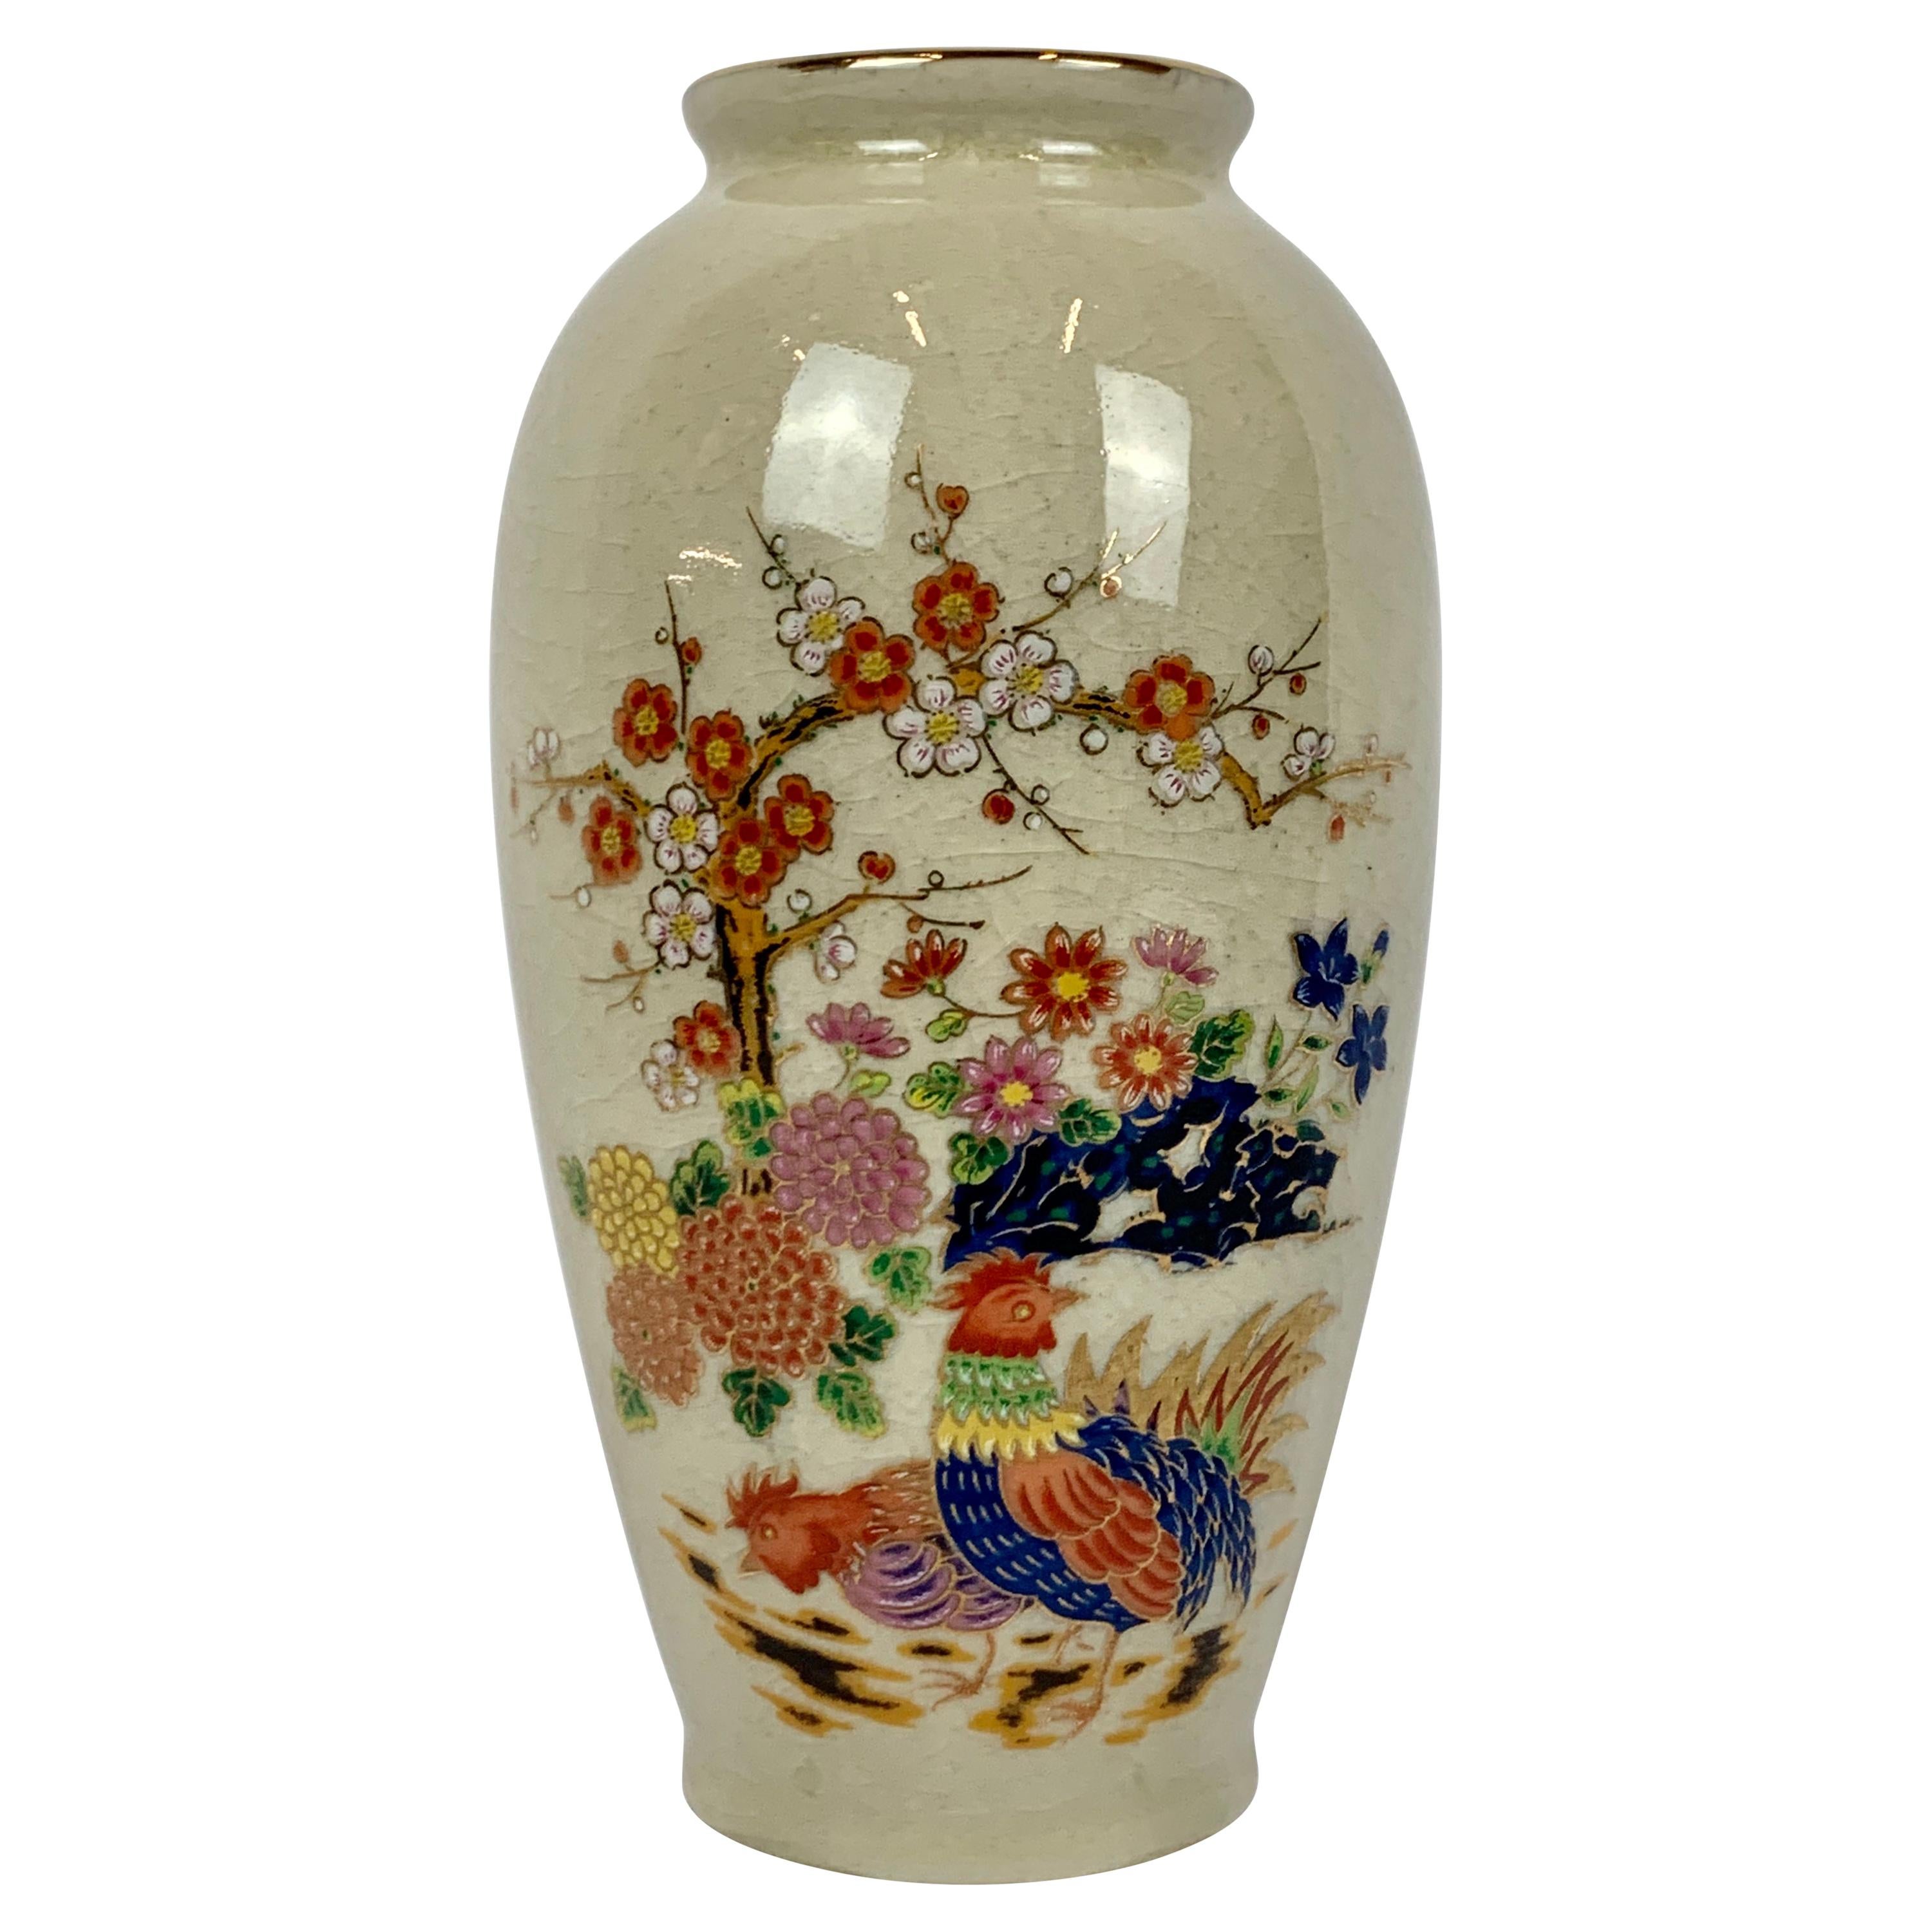 Vase with Delicate Hand Painted Floral Spray on Neutral Ground-Japan, early 20th